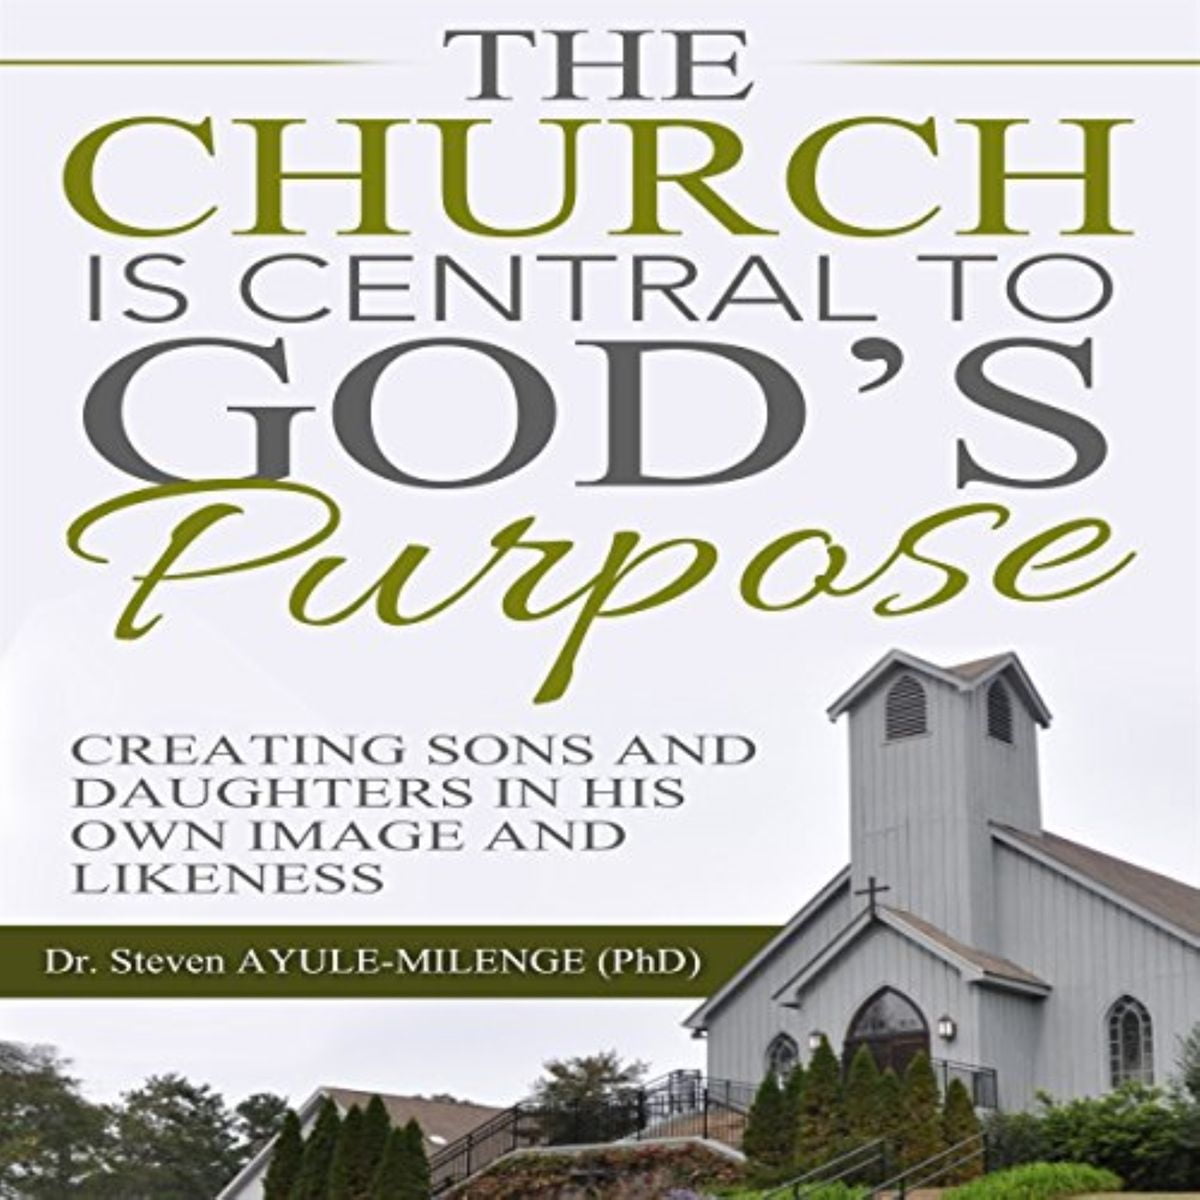 what is the purposes of churches